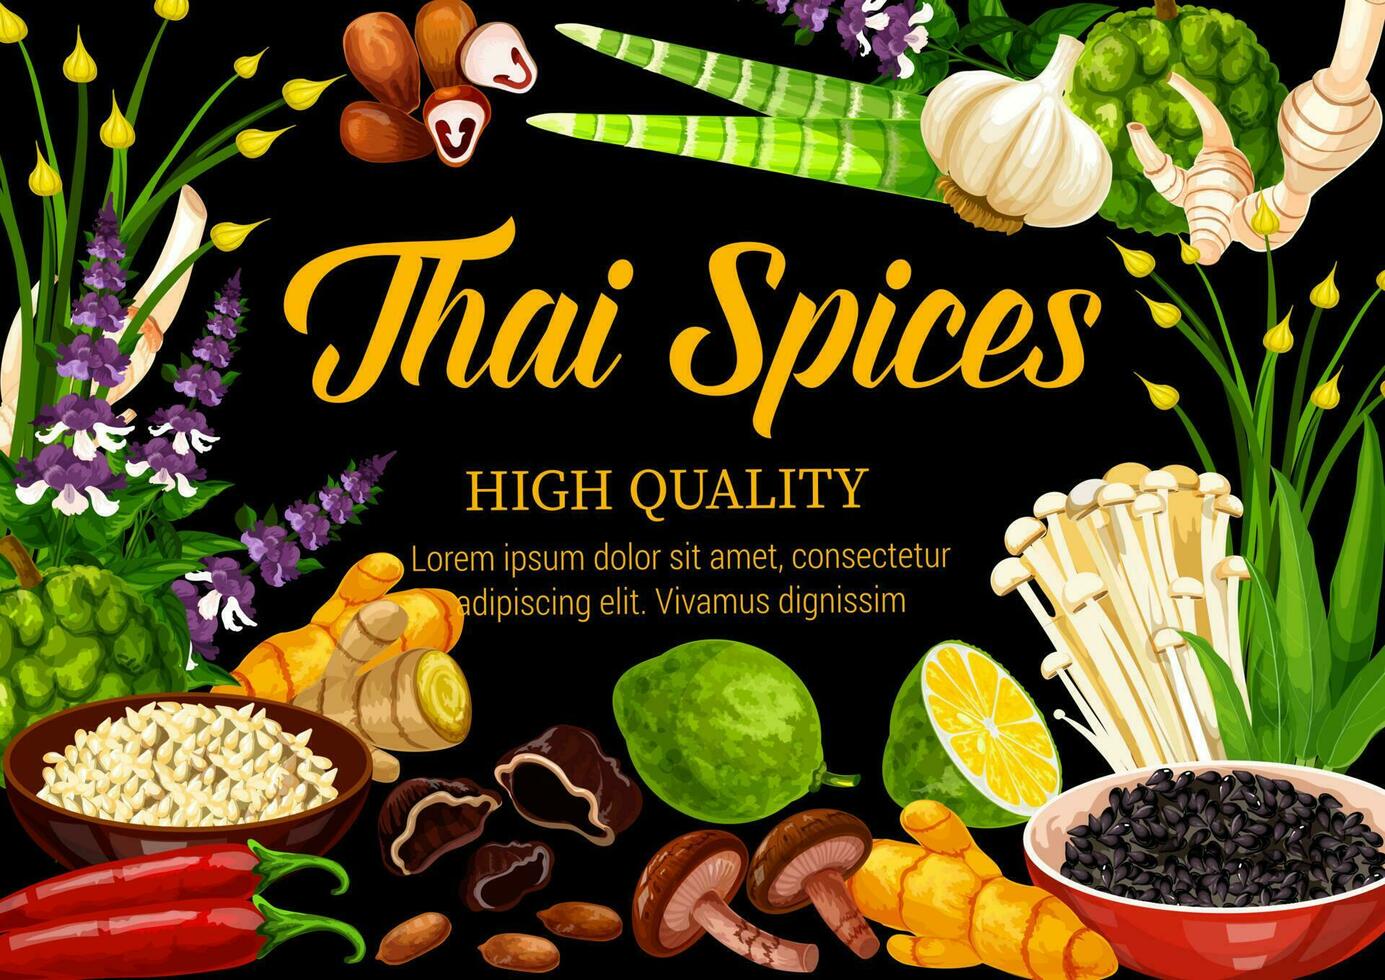 Thai herbs, spices and seasonings, food condiments vector